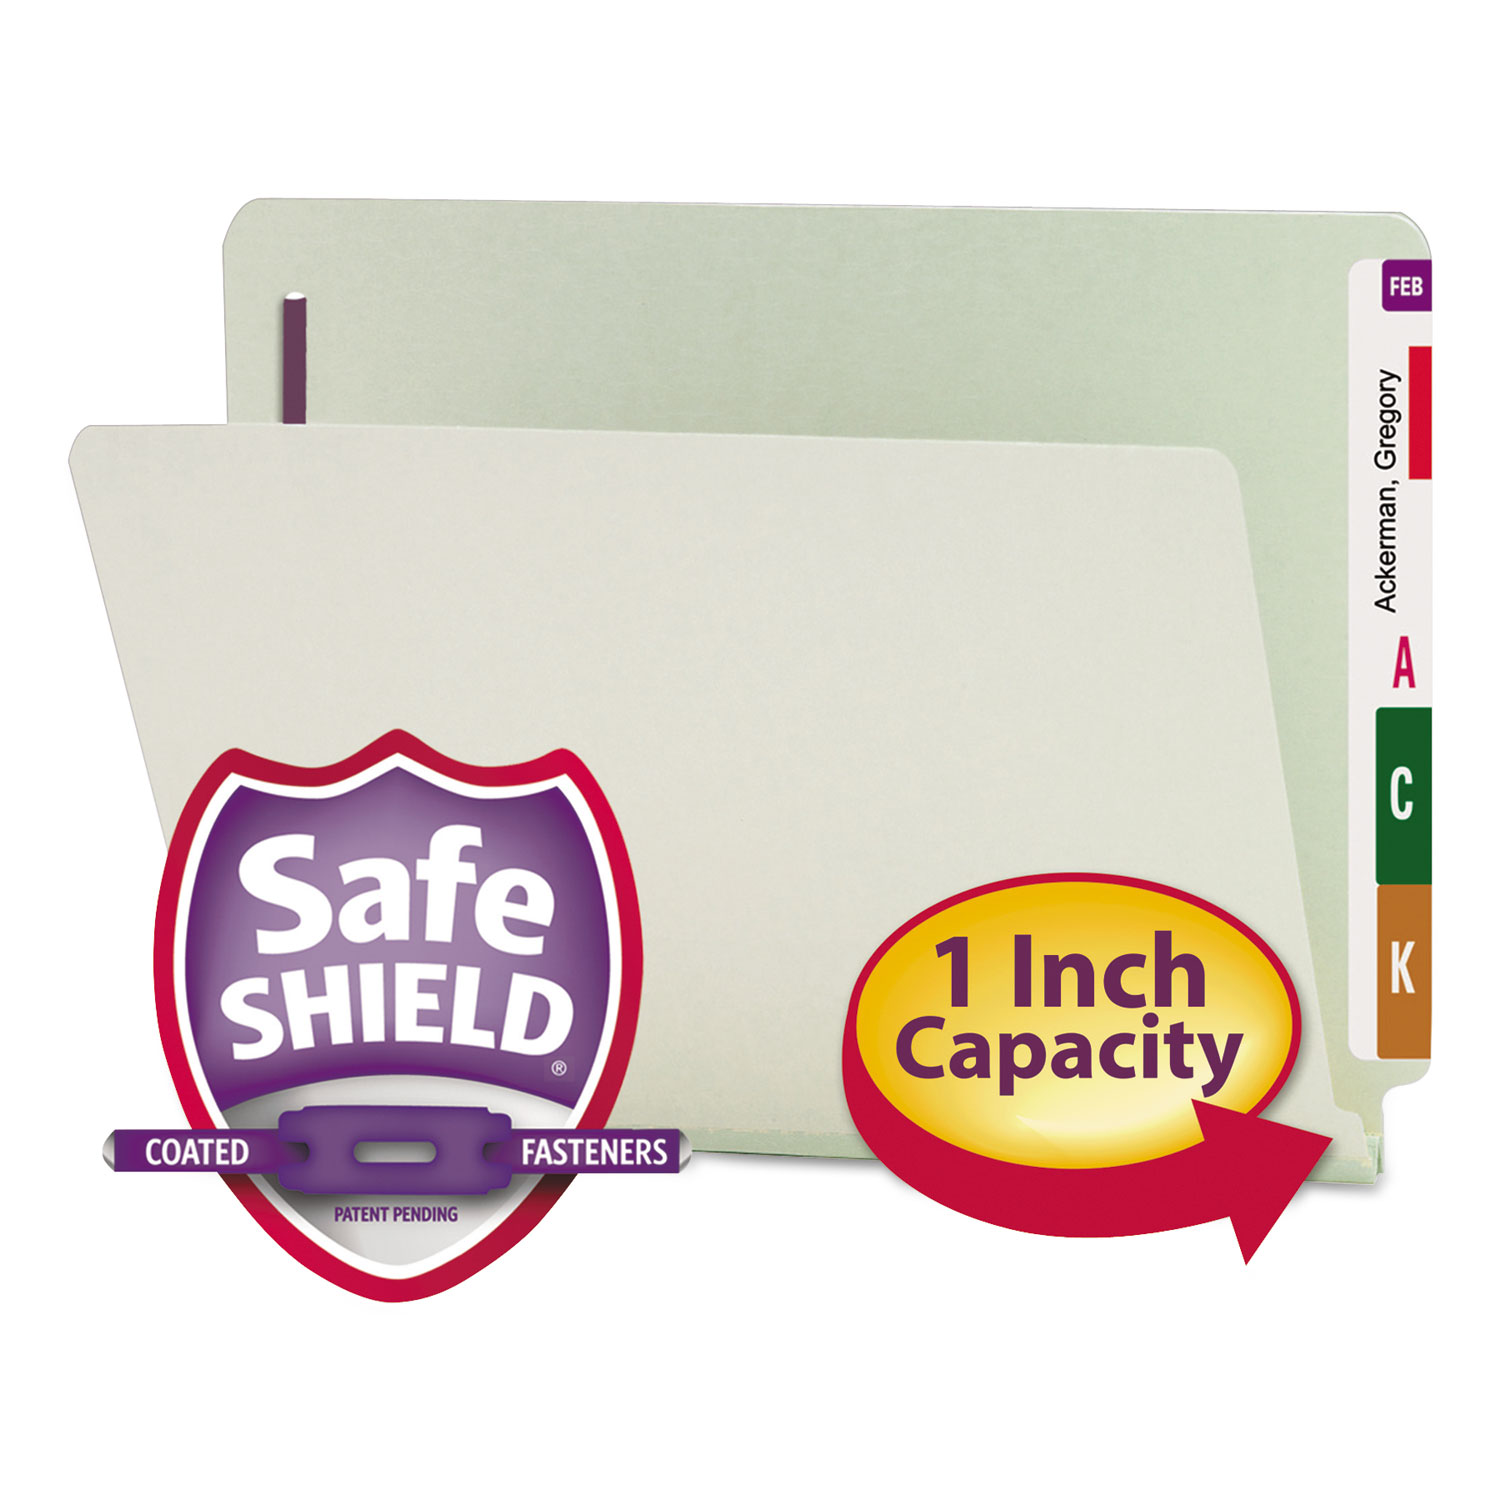 End Tab 1" Expansion Pressboard File Folders w/Two SafeSHIELD Coated Fasteners, Straight Tab, Letter Size, Gray-Green, 25/Box